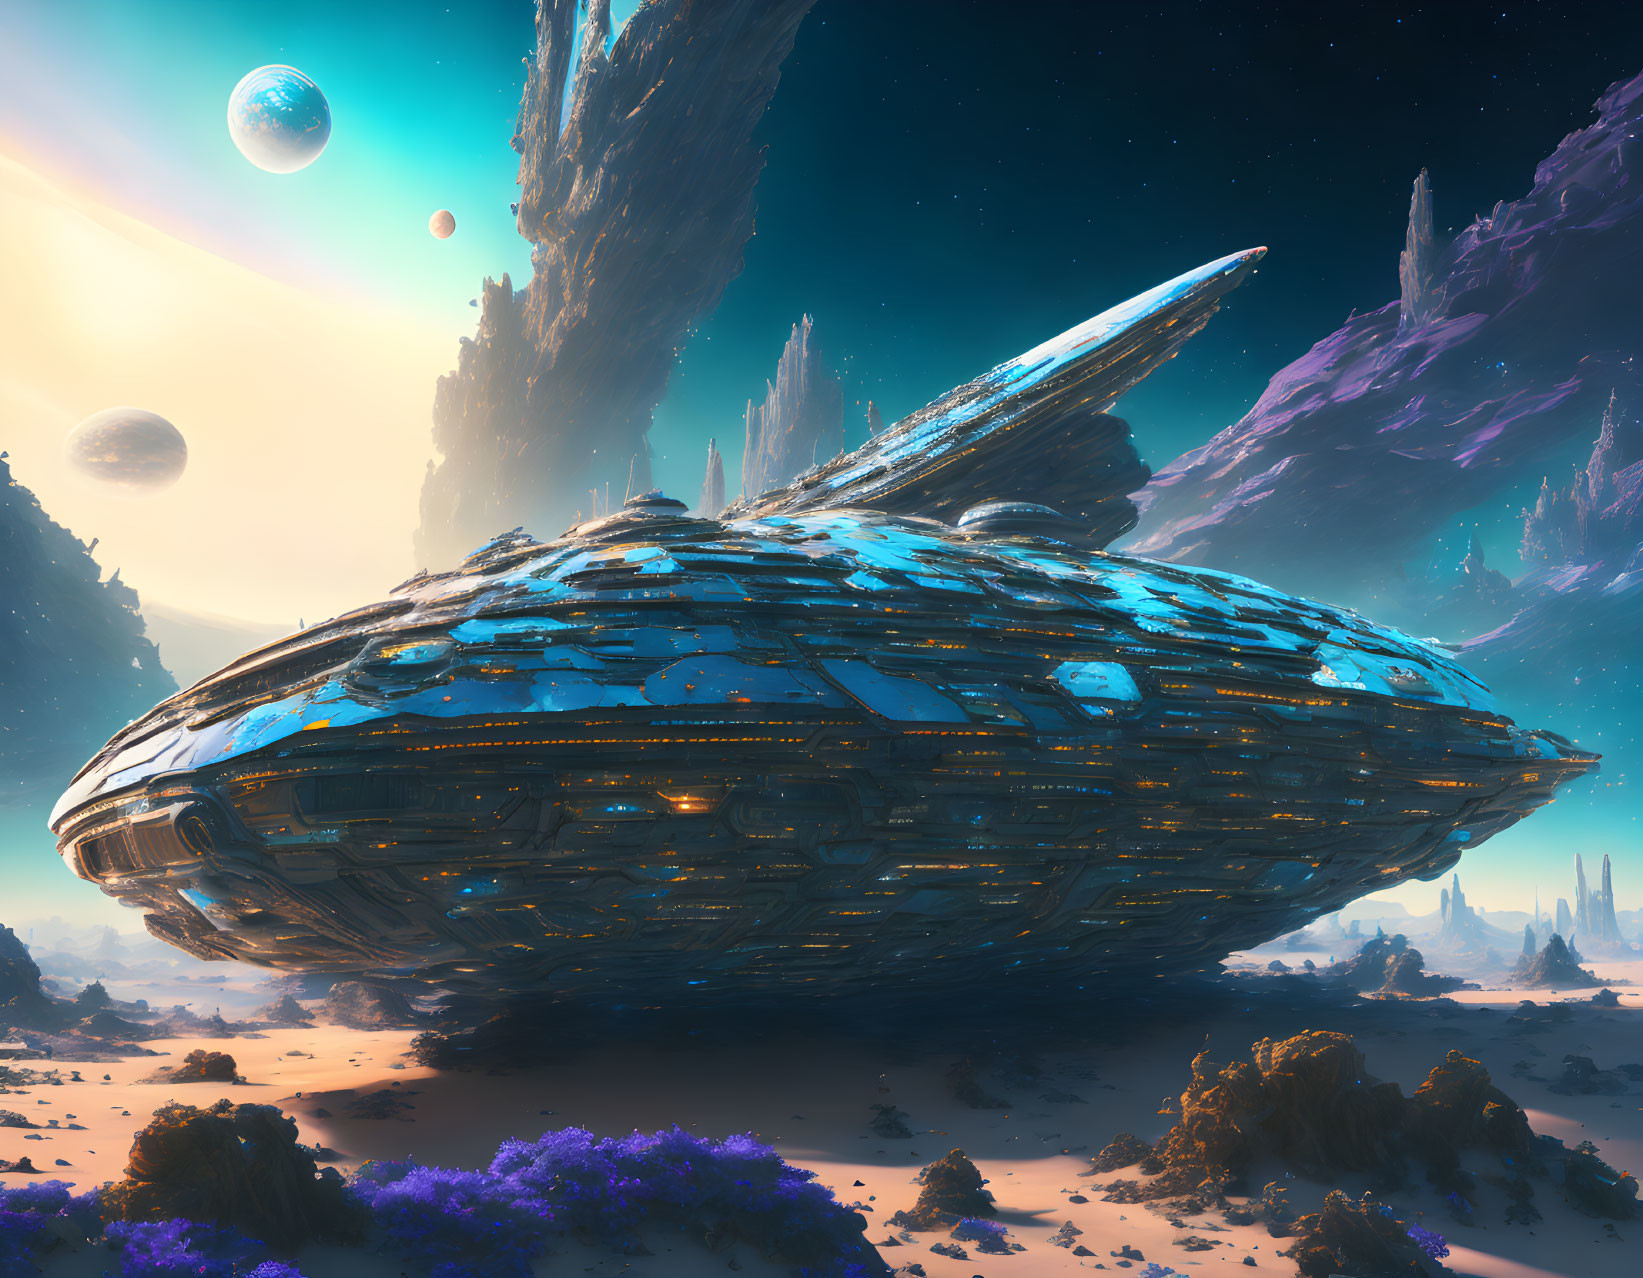 Giant spaceship on alien landscape with purple flora and towering rocks